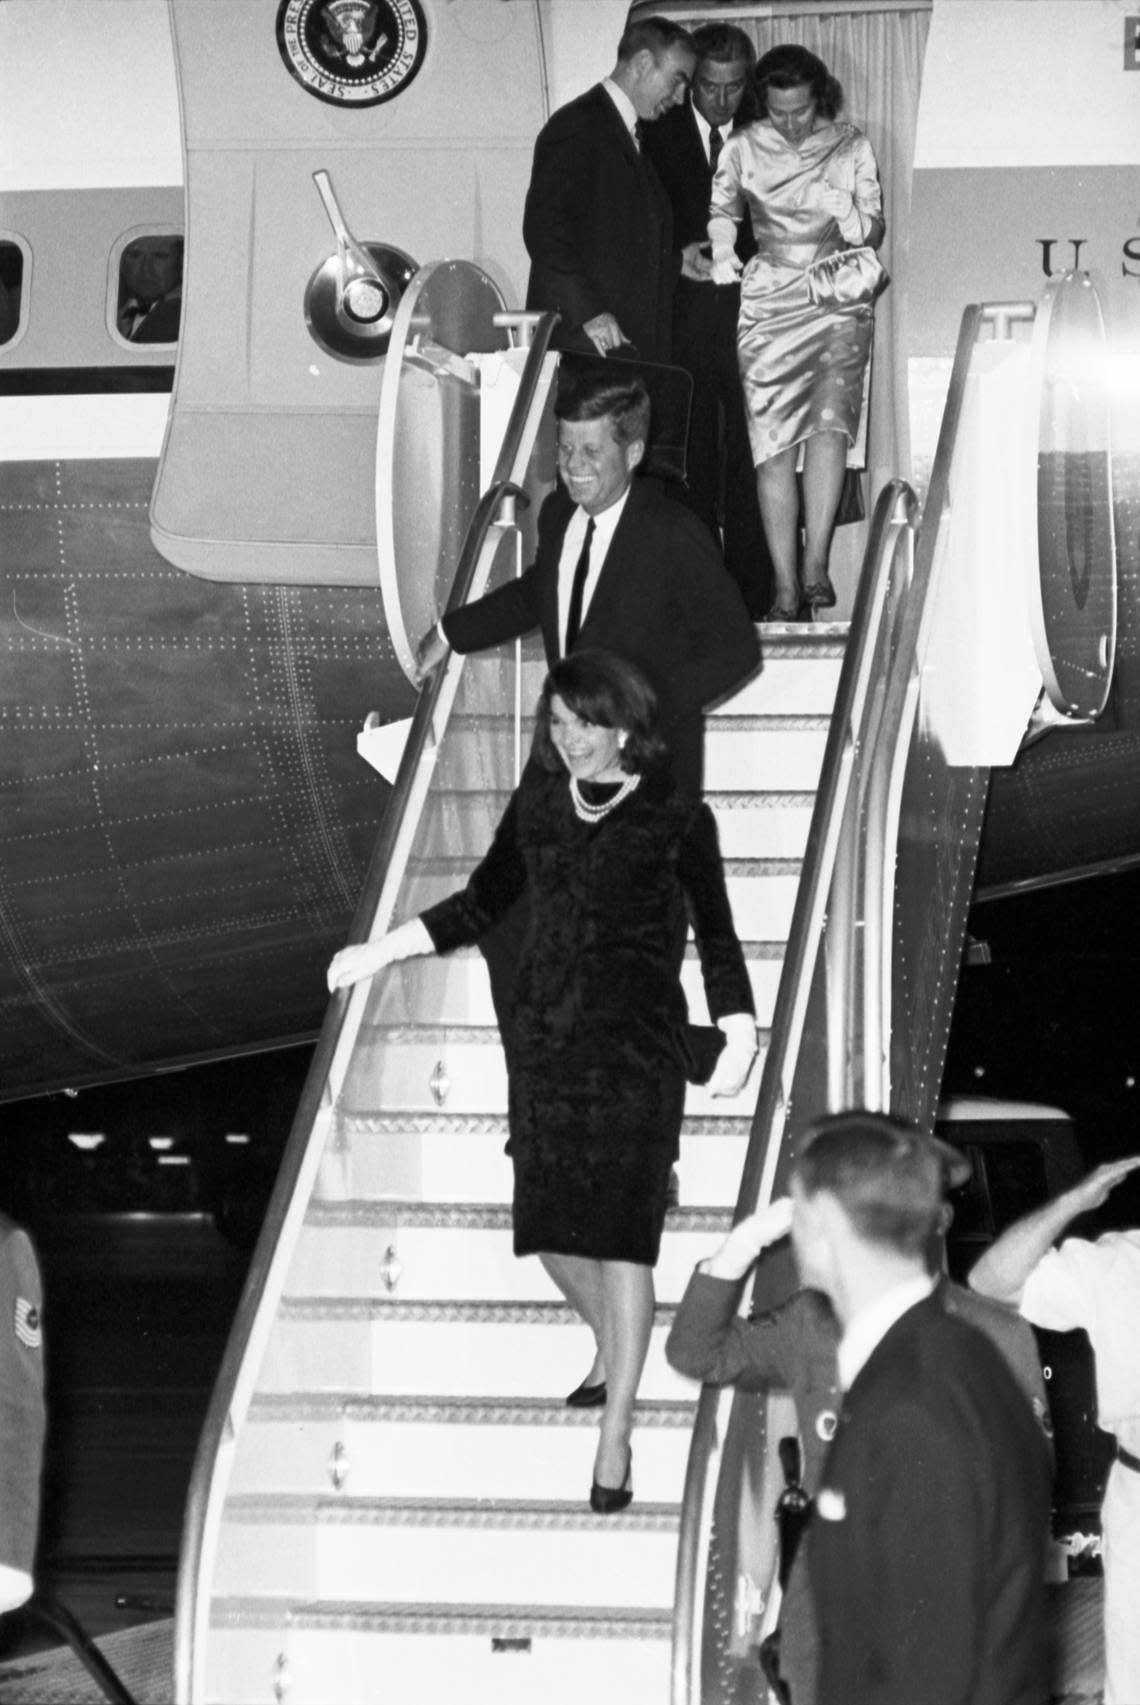 President John F. Kennedy and Jackie Kennedy descending from Air Force One at Carswell Air Force Base. Congressman Jim Wright, Gov. John Connally and Mrs. Connally seen in the doorway. Nov. 21, 1963